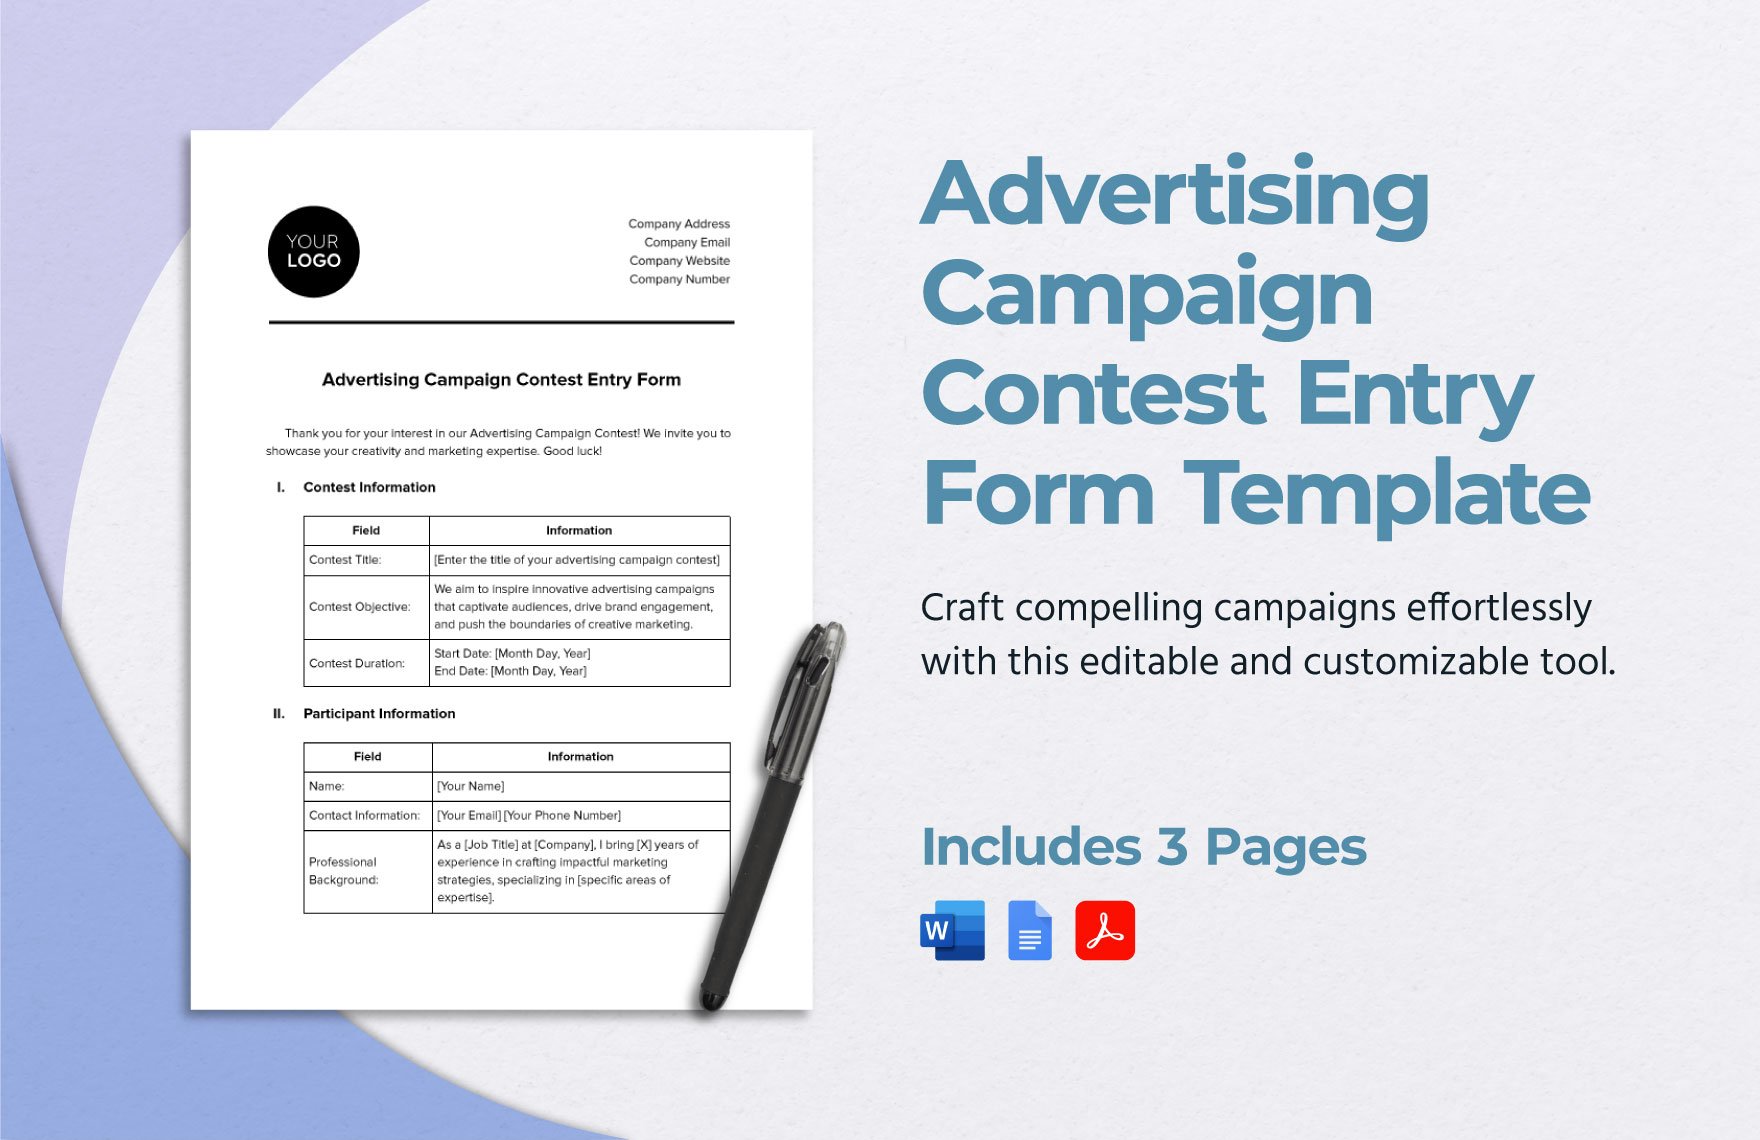 Advertising Campaign Contest Entry Form Template in Word, Google Docs, PDF